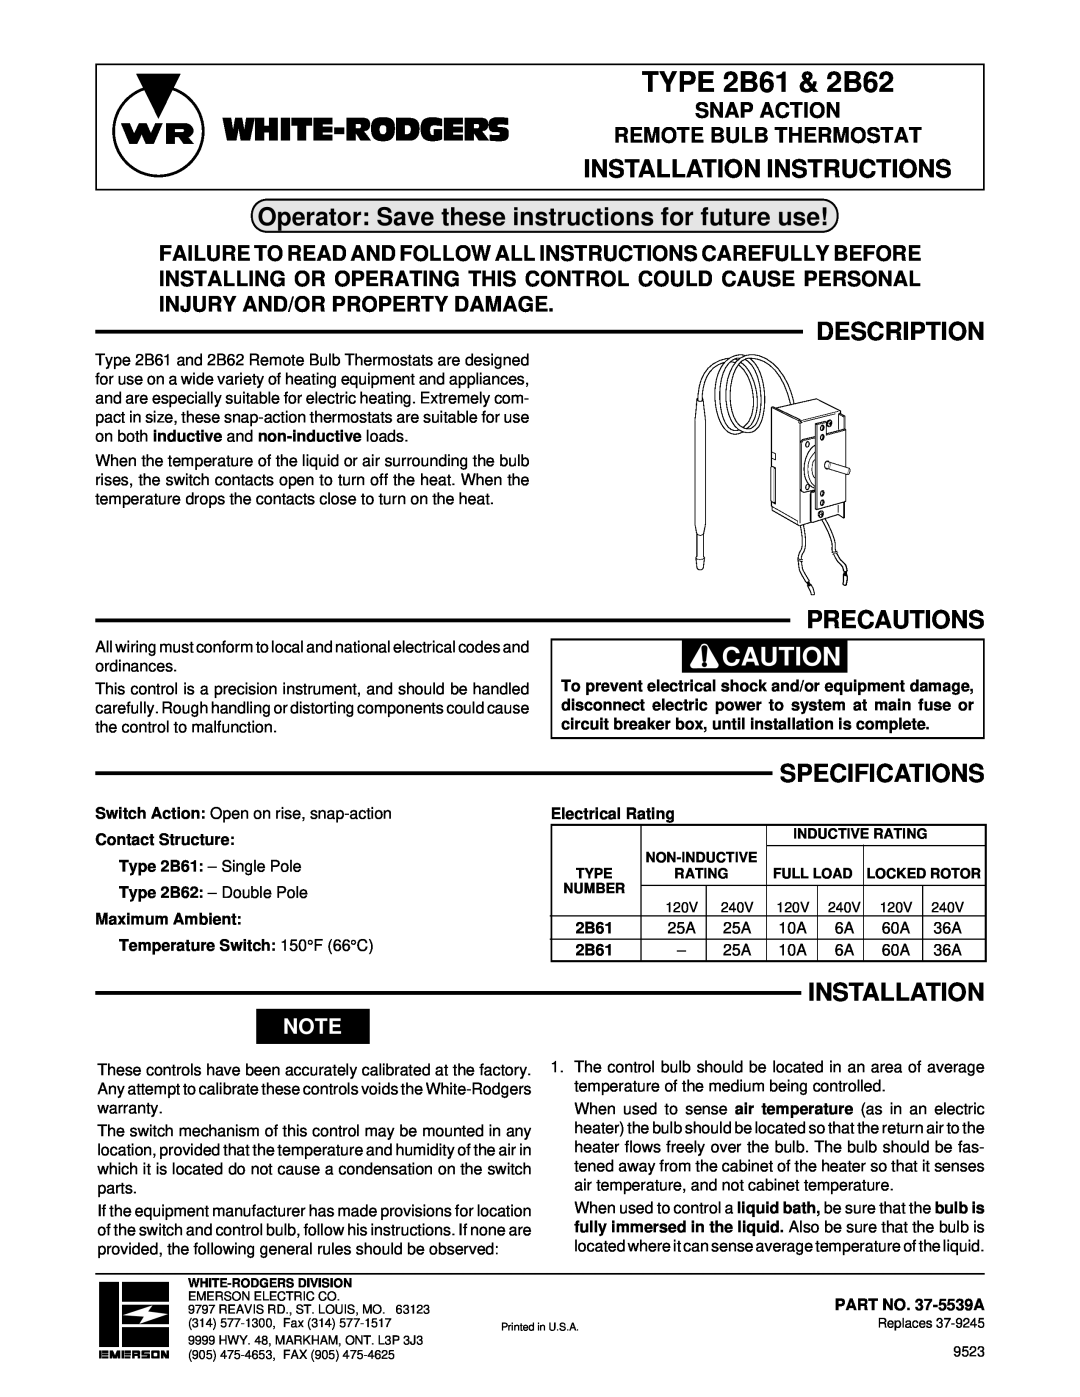 White Rodgers installation instructions White-Rodgers, TYPE 2B61 & 2B62, Installation Instructions, Description 